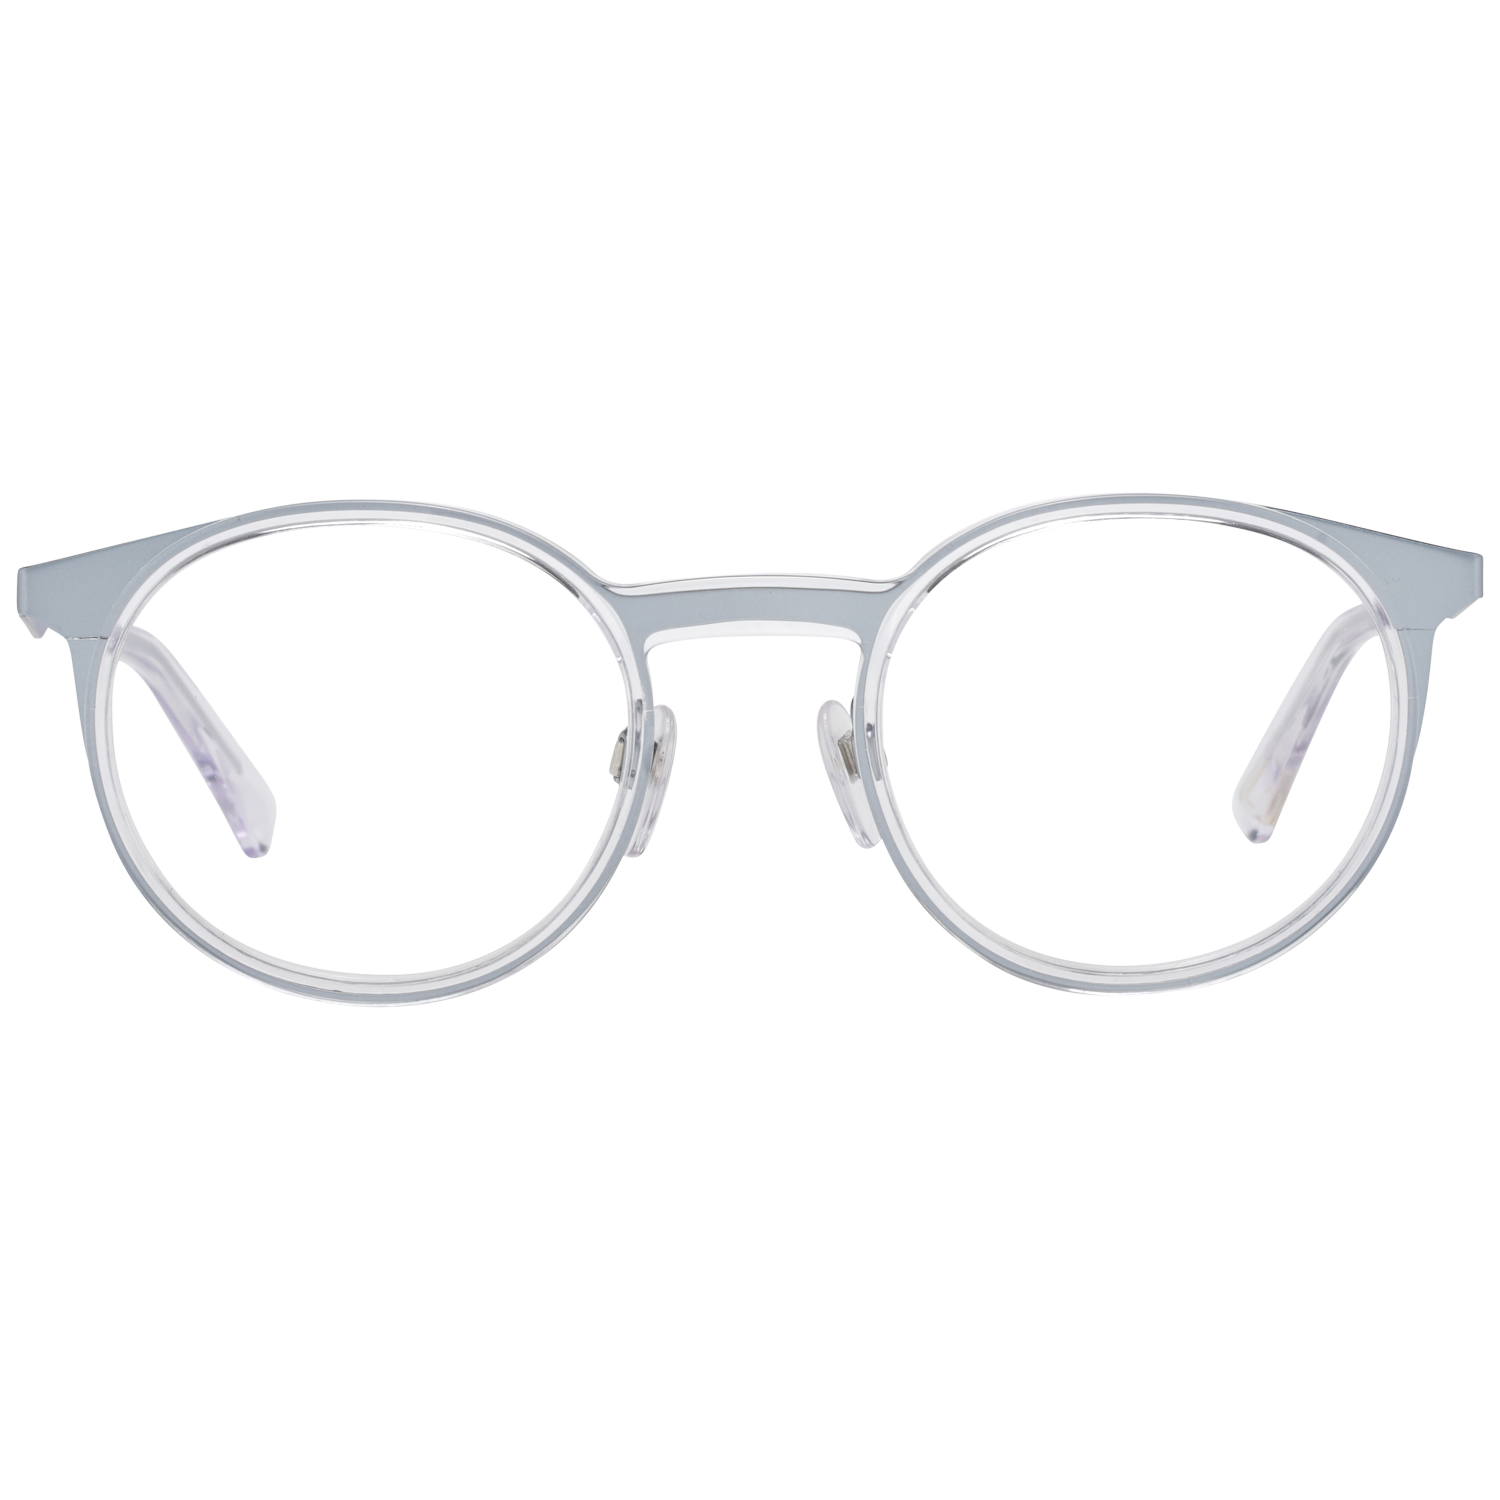 GenderUnisexMain colorGreyFrame colorGreyFrame materialMetal & PlasticSize49-22-145Lenses width49mmLenses heigth42mmBridge length22mmFrame width136mmTemple length145mmShipment includesCase, Cleaning clothStyleFull-RimSpring hingeNo